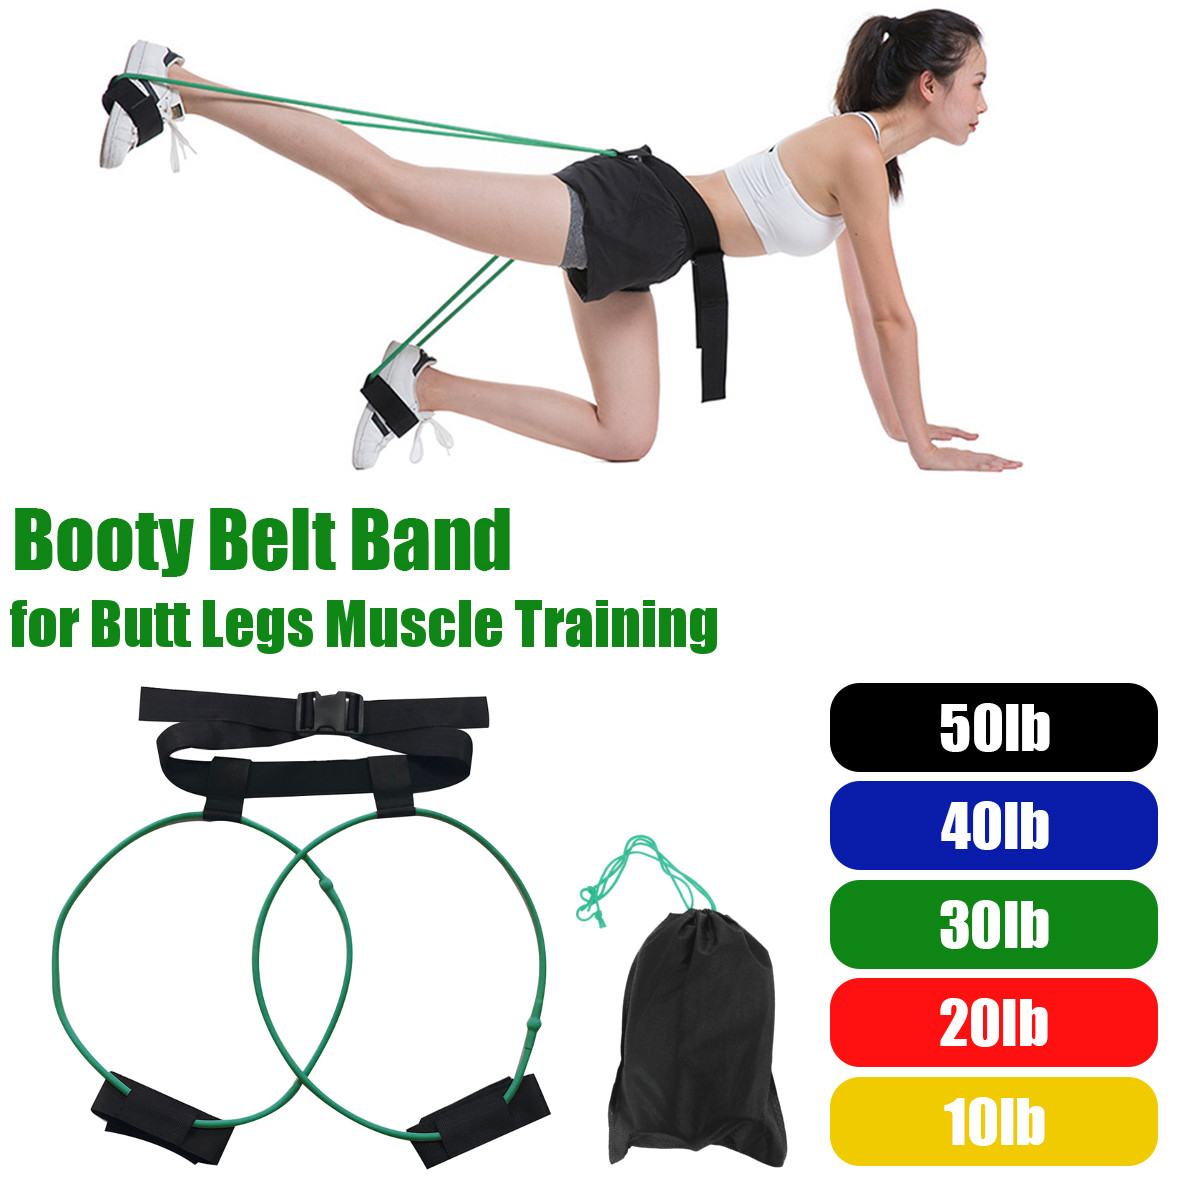 10-40lbs-Pedal-Resistance-Band-Women-Hip-Trainer-Belt-Band-Gum-Workout-Fitness-Bands-Body-Glute-Musc-1697334-2